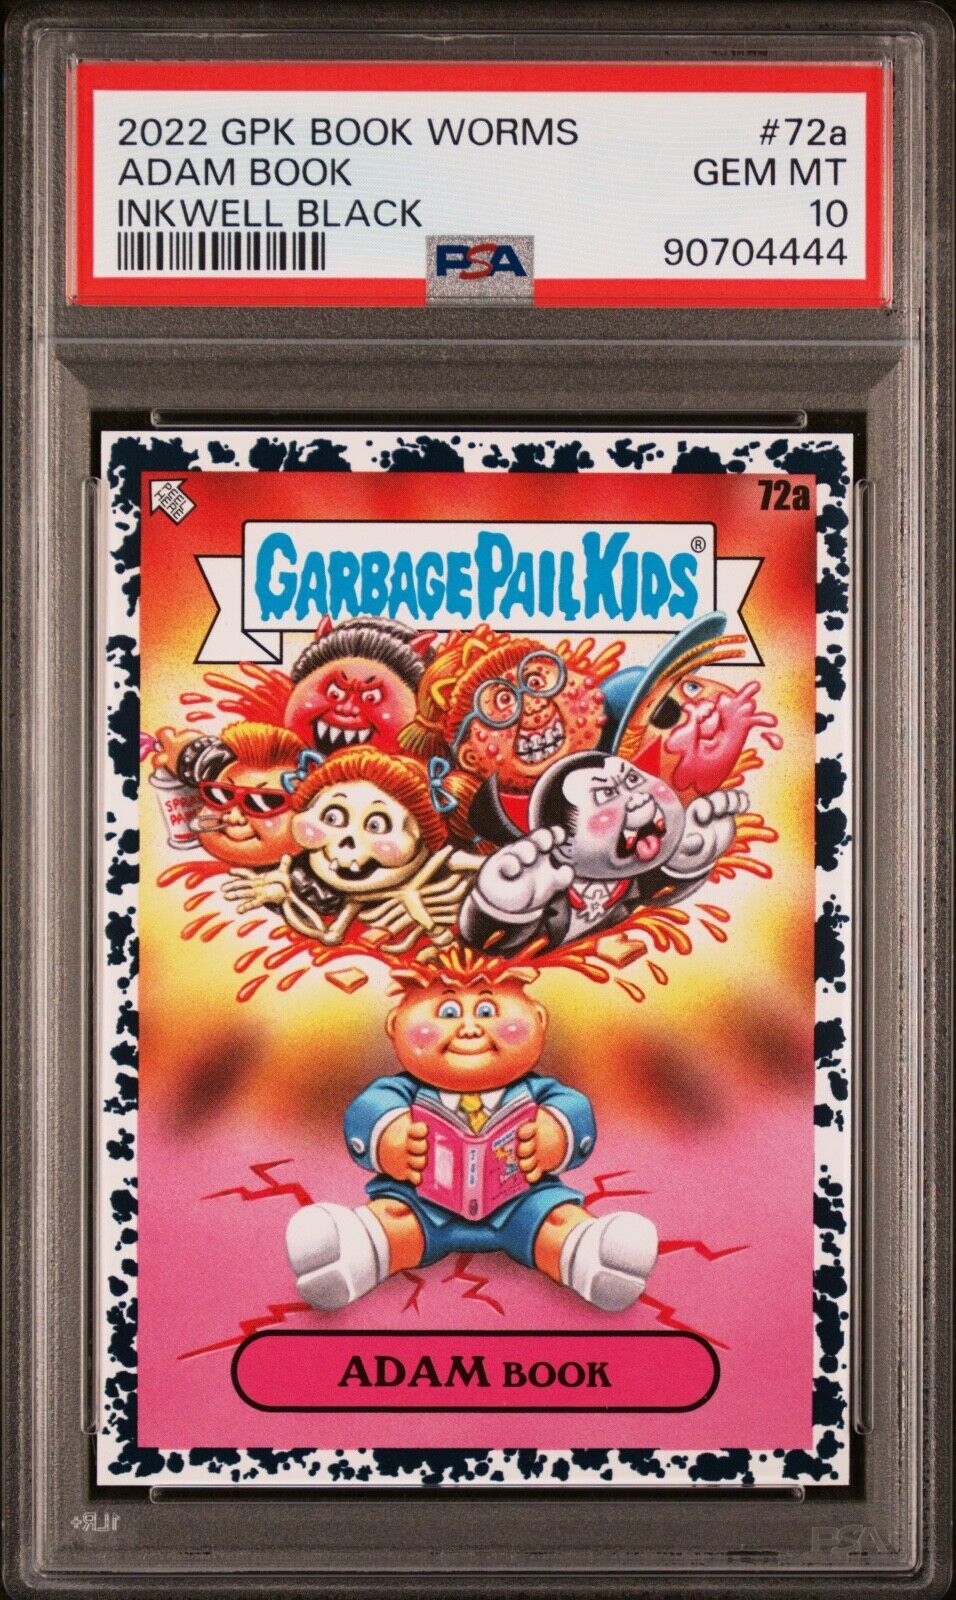 2022 GARBAGE PAIL KIDS BOOK WORMS 72a ADAM BOOK INKWELL BLACK PSA 10 LOW POP